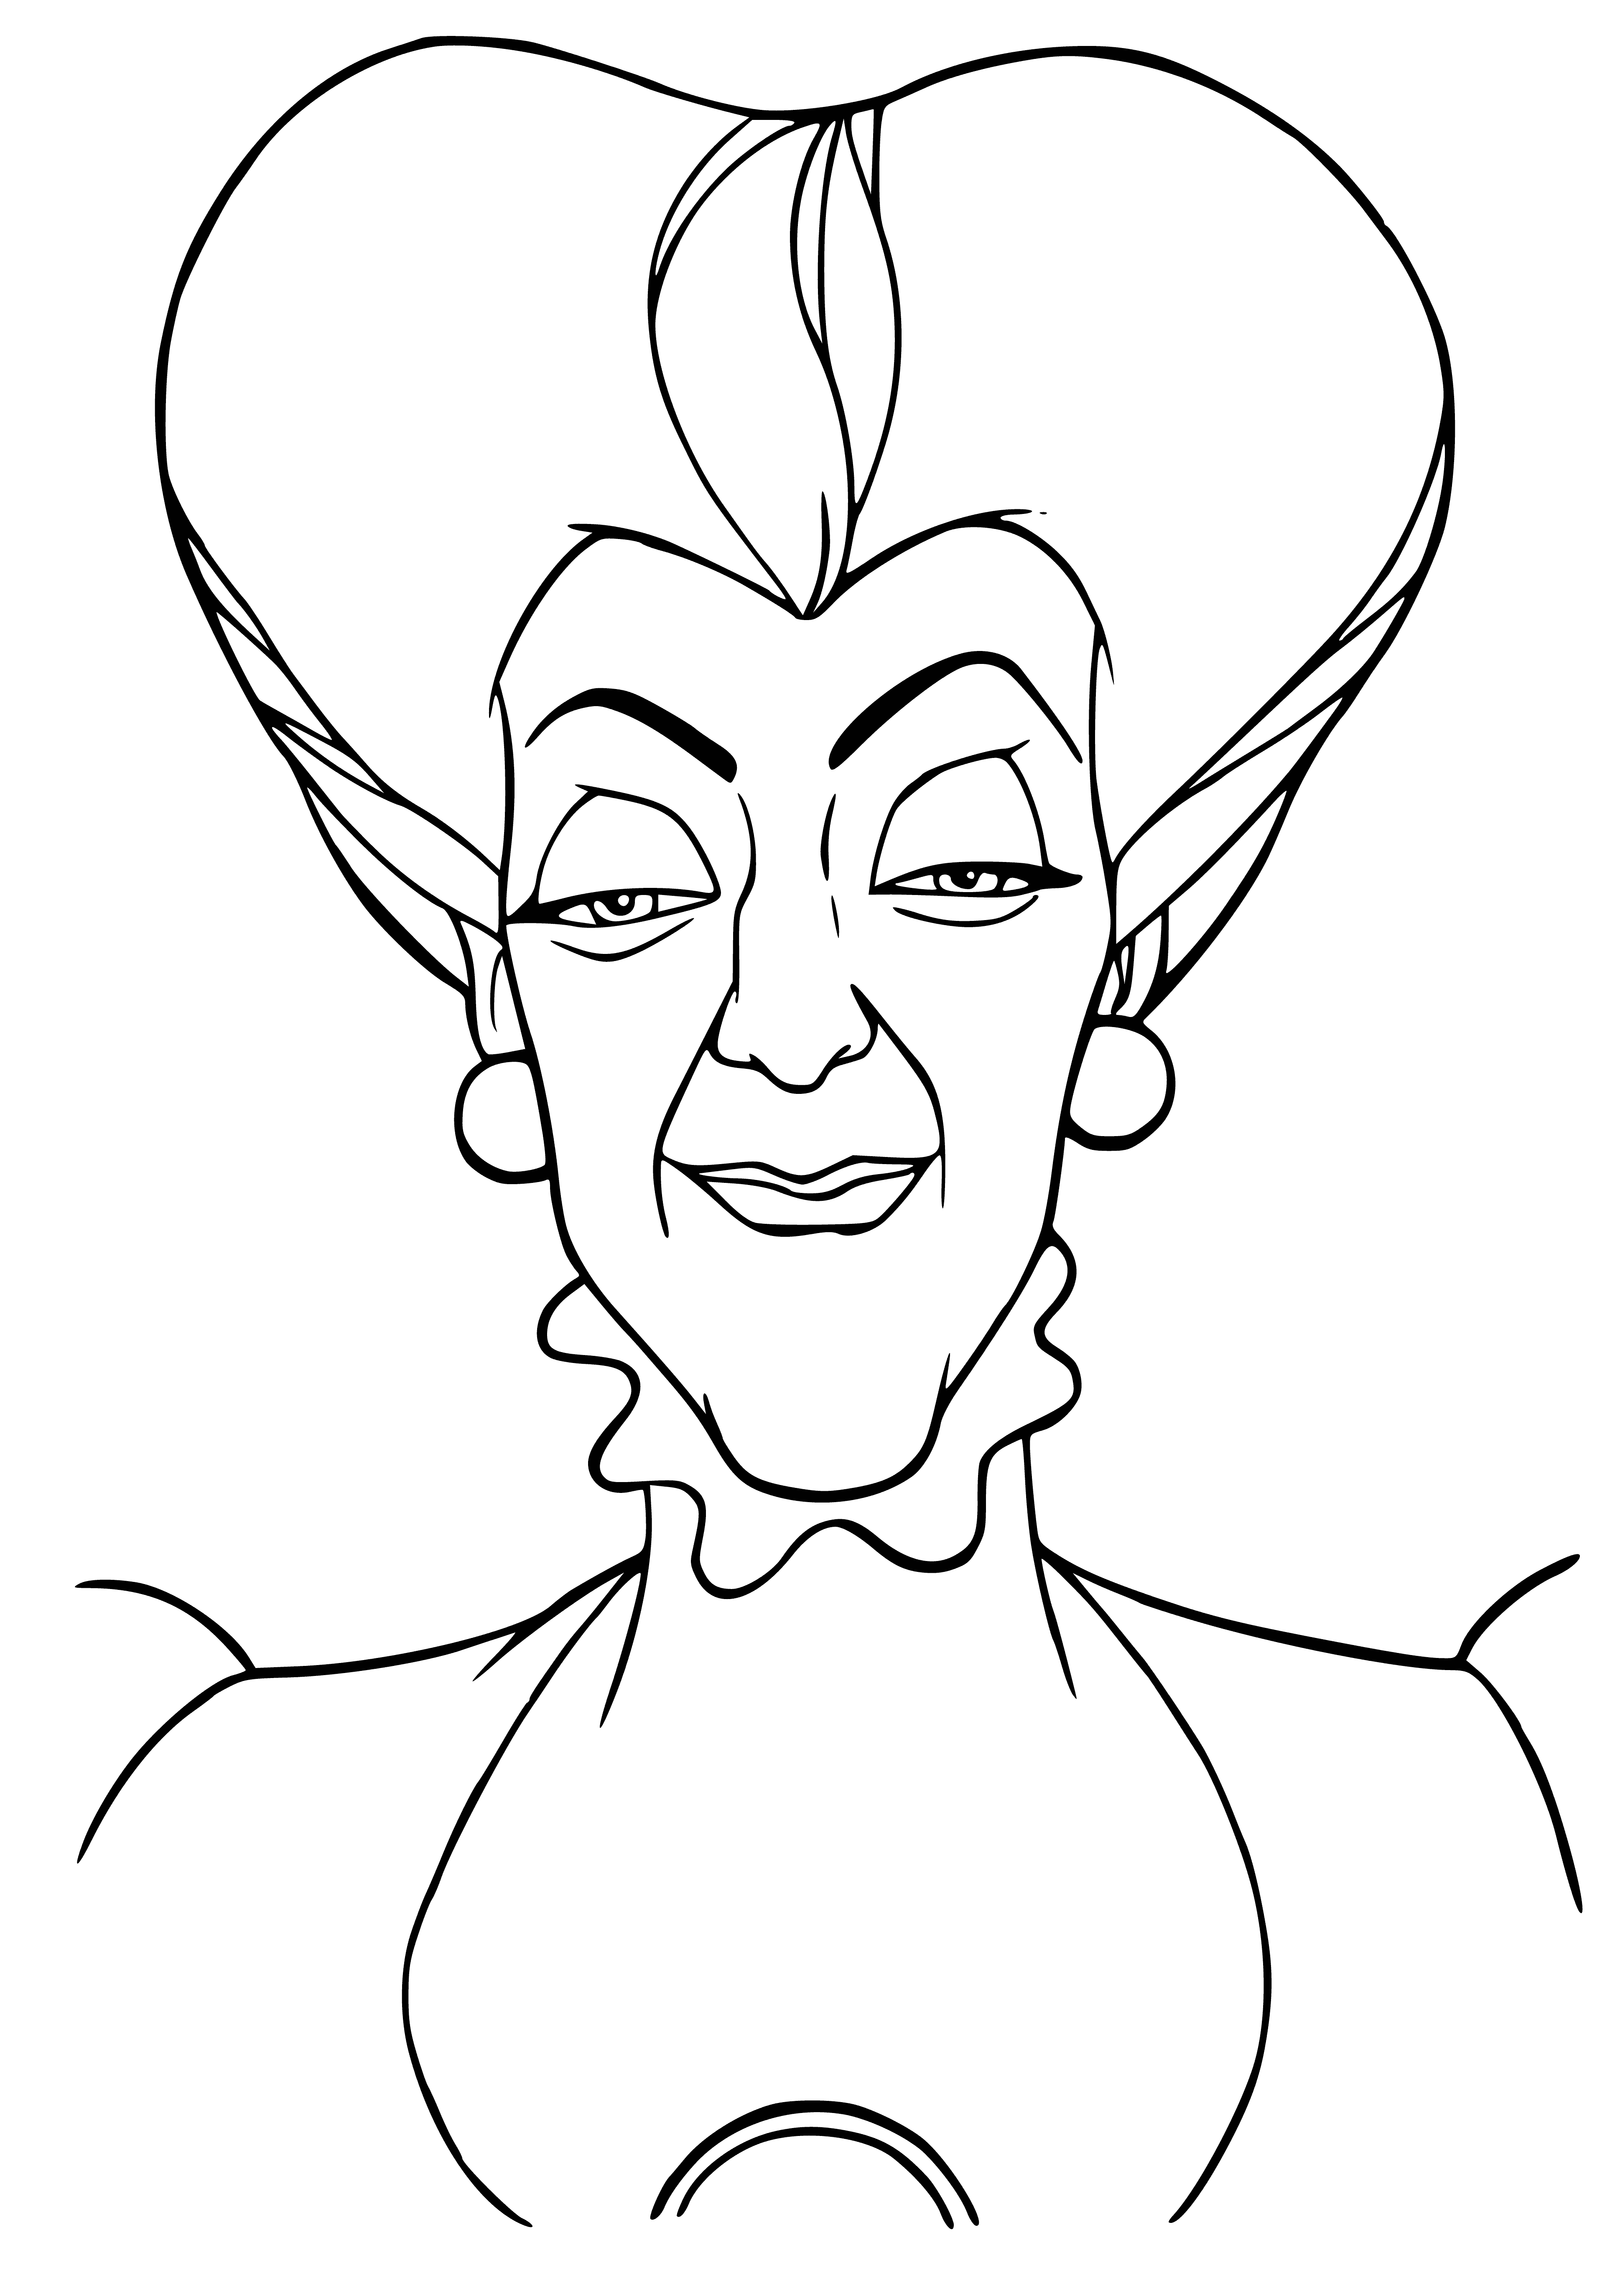 Stepmother is happy coloring page